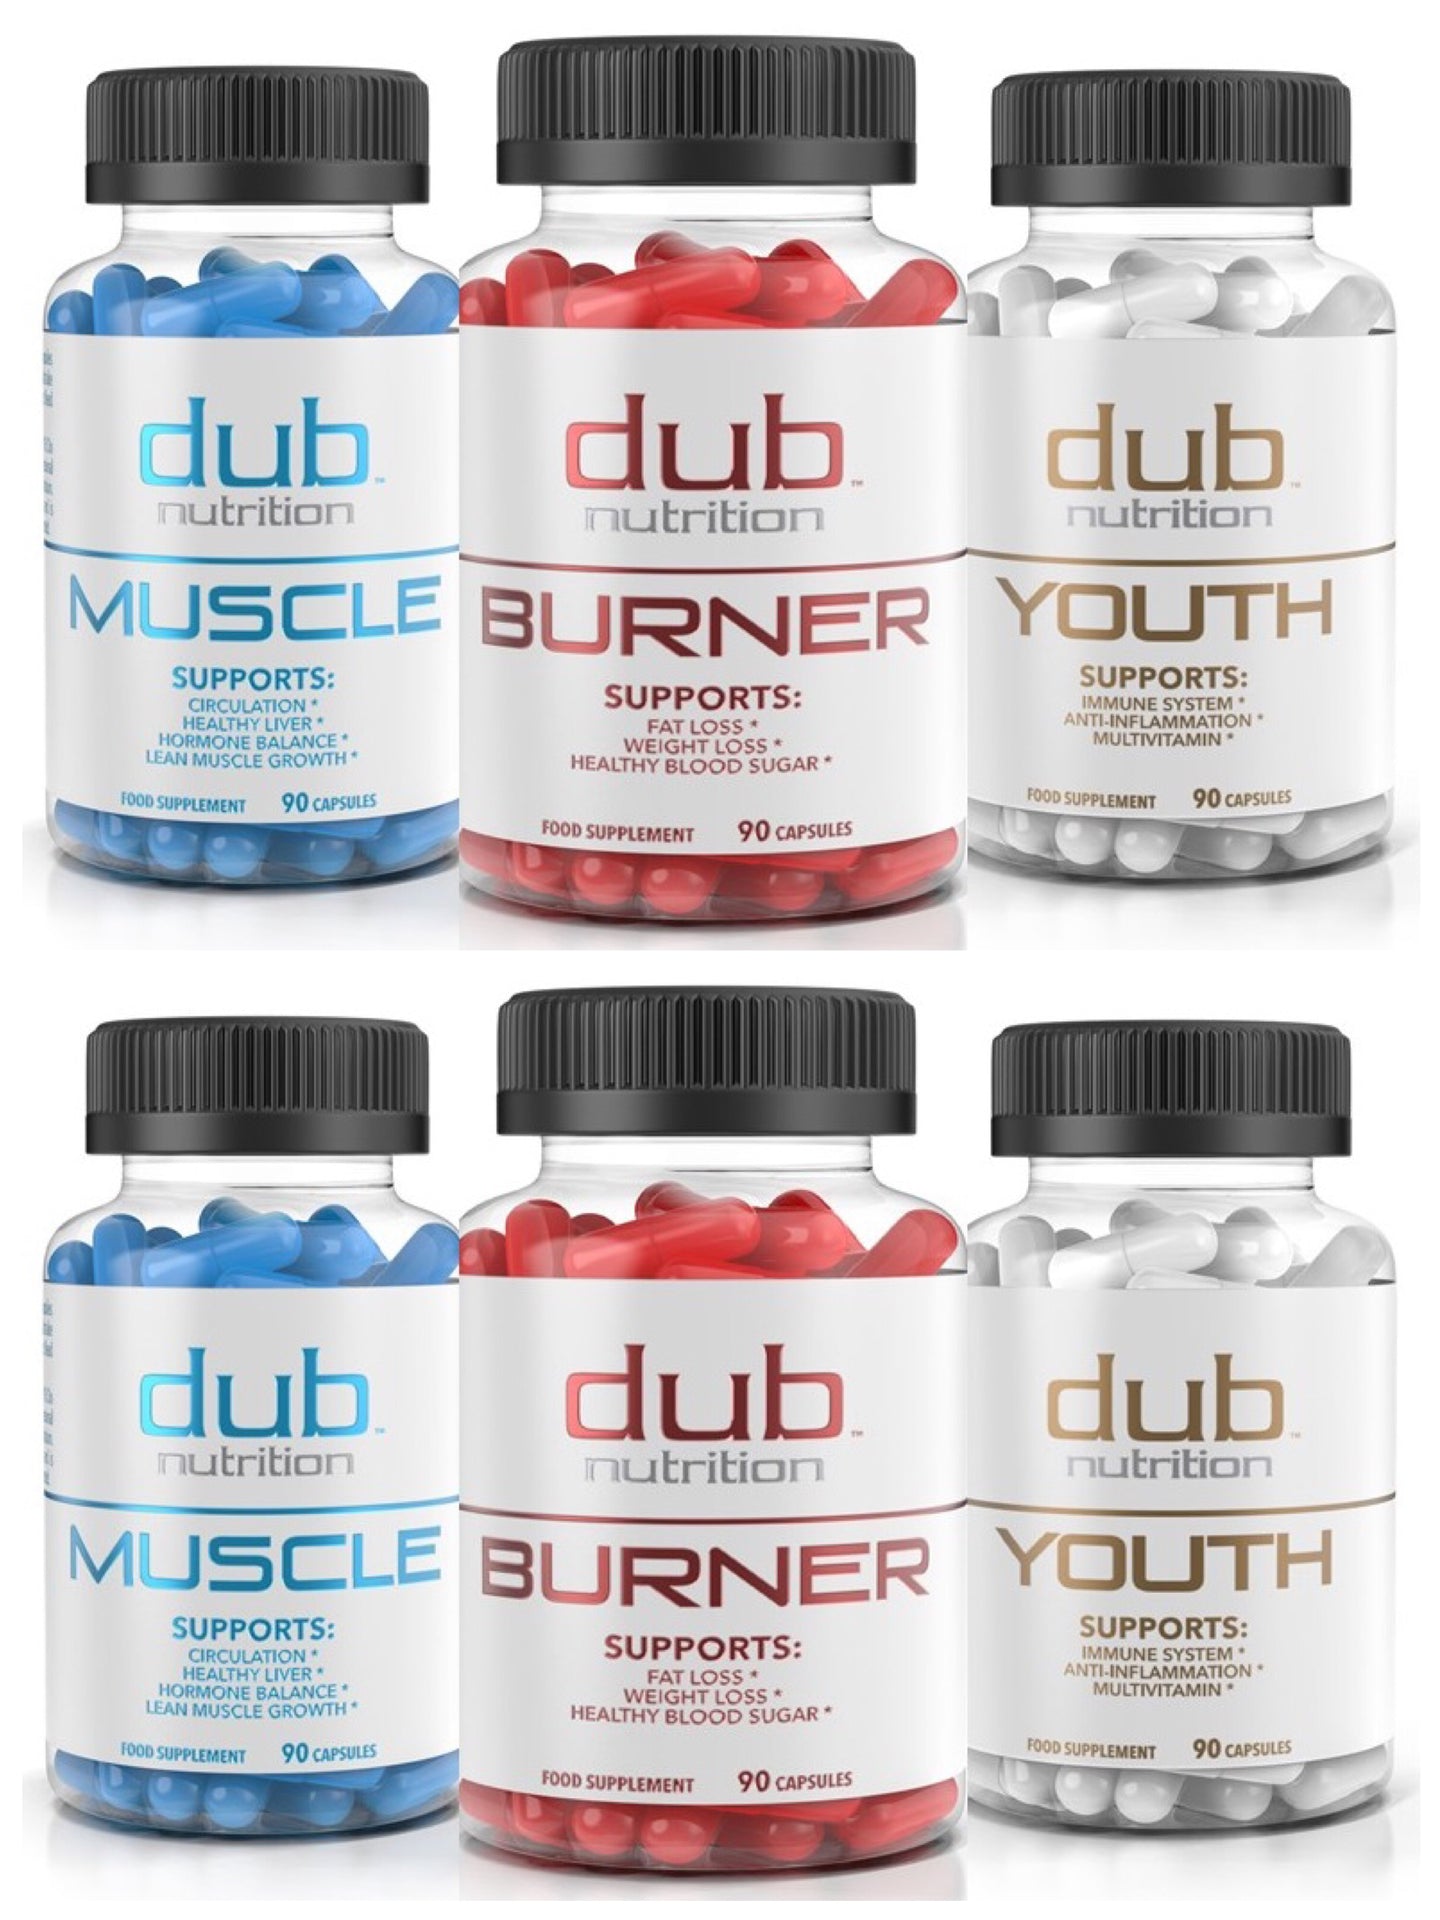 Burner, Muscle, Youth Duo